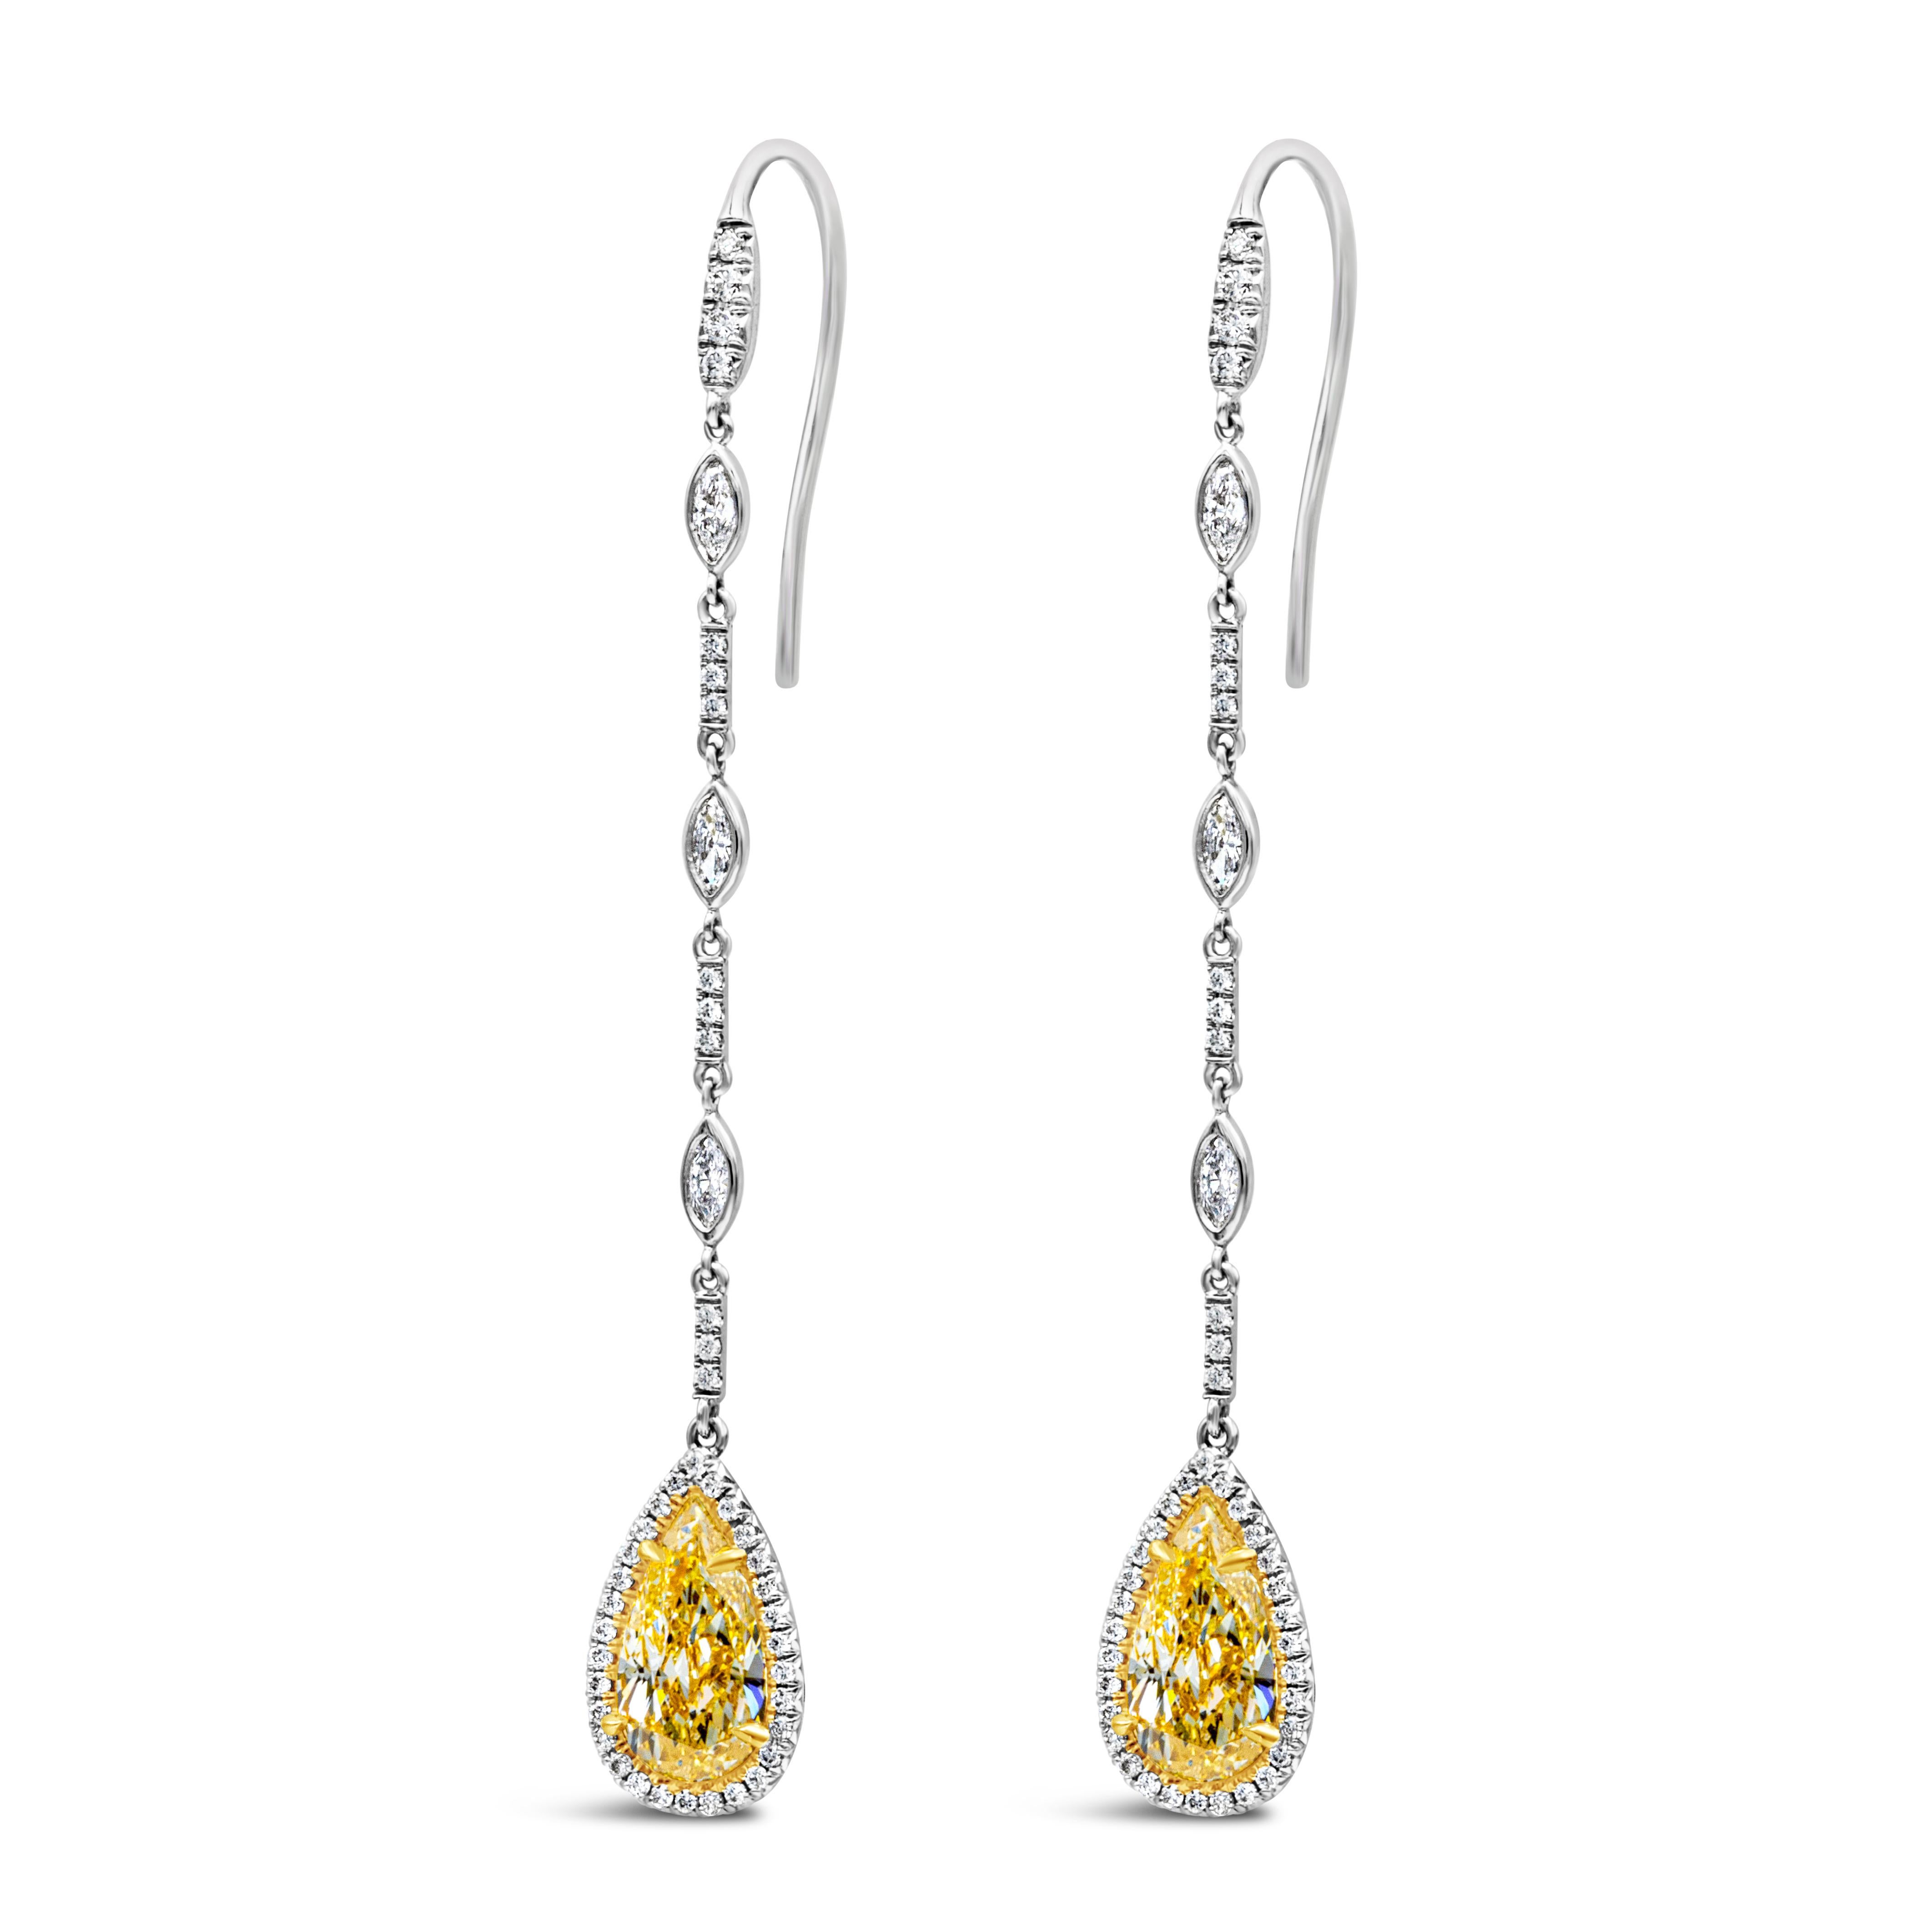 Showcases a color-rich yellow pear shape diamond weighing 3.20 carats total, surrounded by a single row of round brilliant diamonds. Suspended on an platinum chain accented with marquise cut diamonds. Accent diamonds weigh 0.58 carats total.

Roman